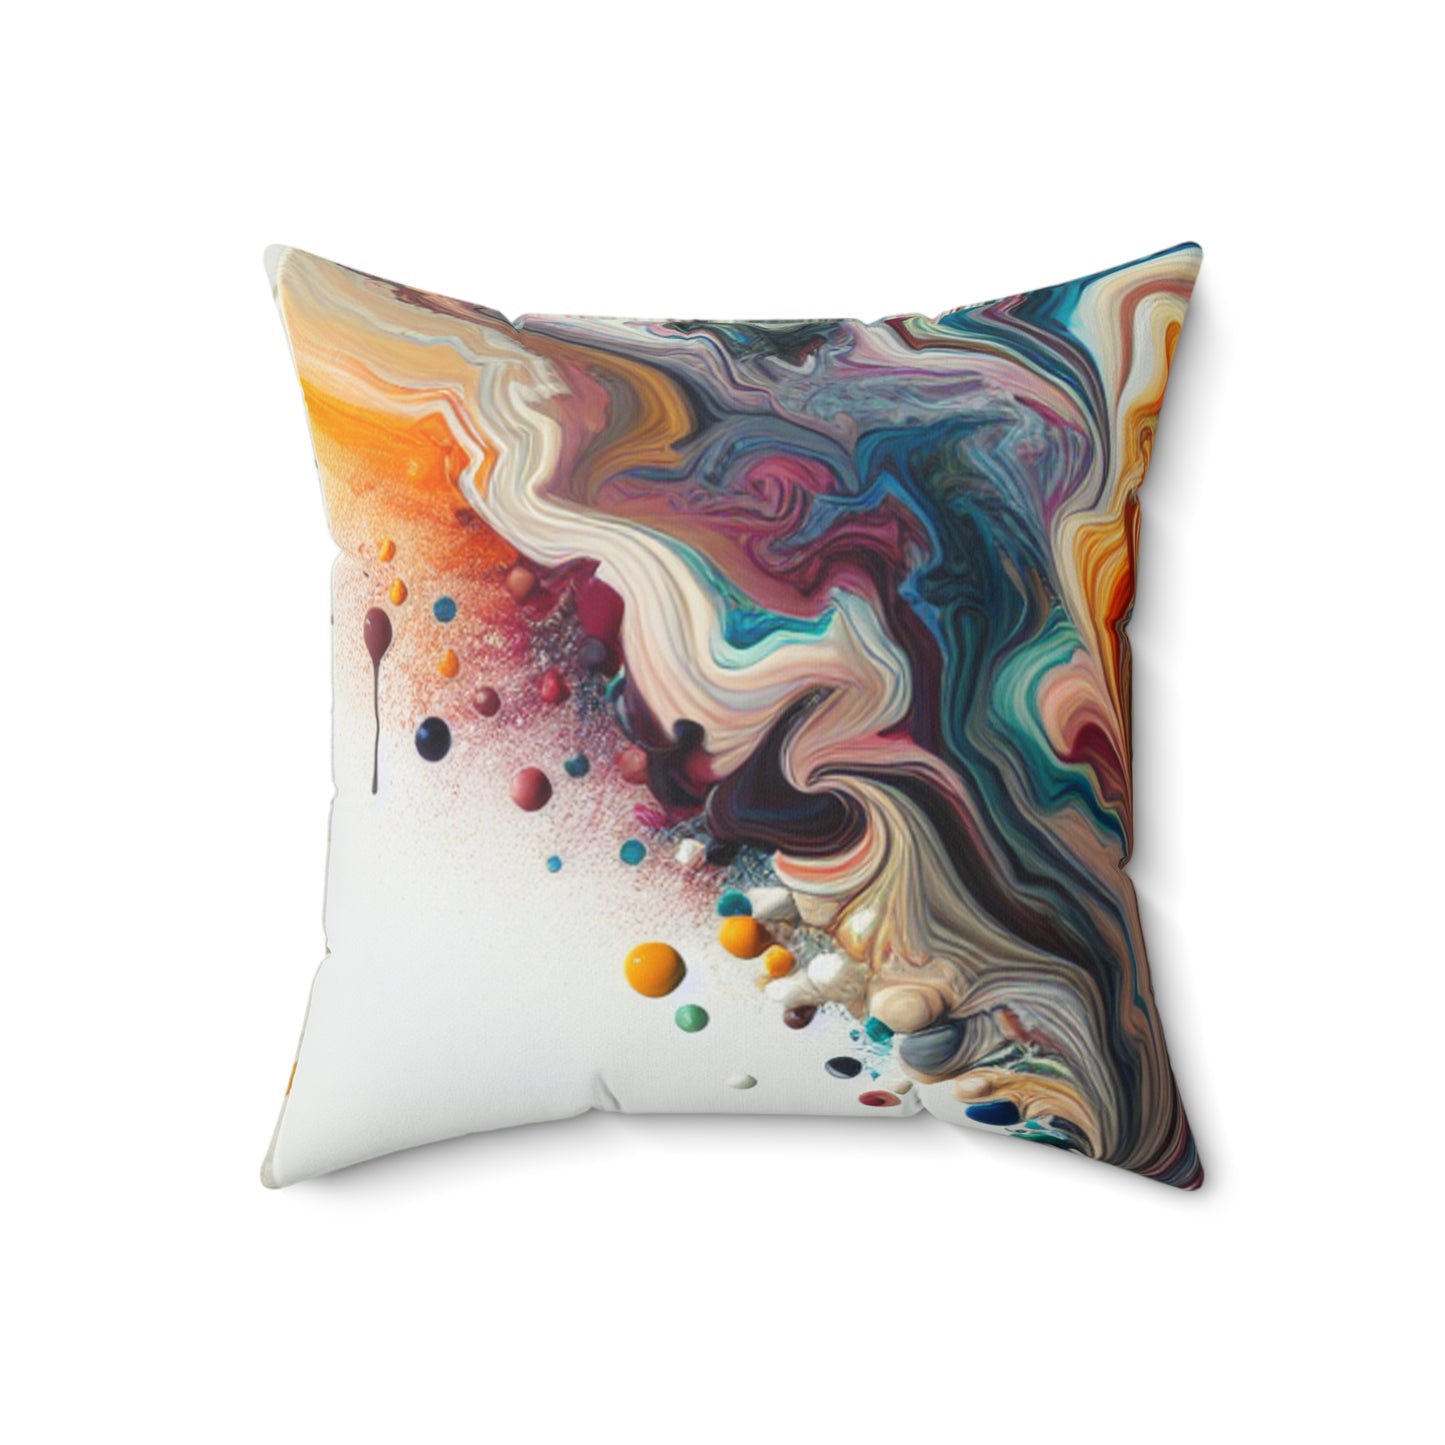 "A Paint Poured Paradise: Acrylic Pouring Art" - The Alien Spun Polyester Square Pillow Acrylic Pouring Style